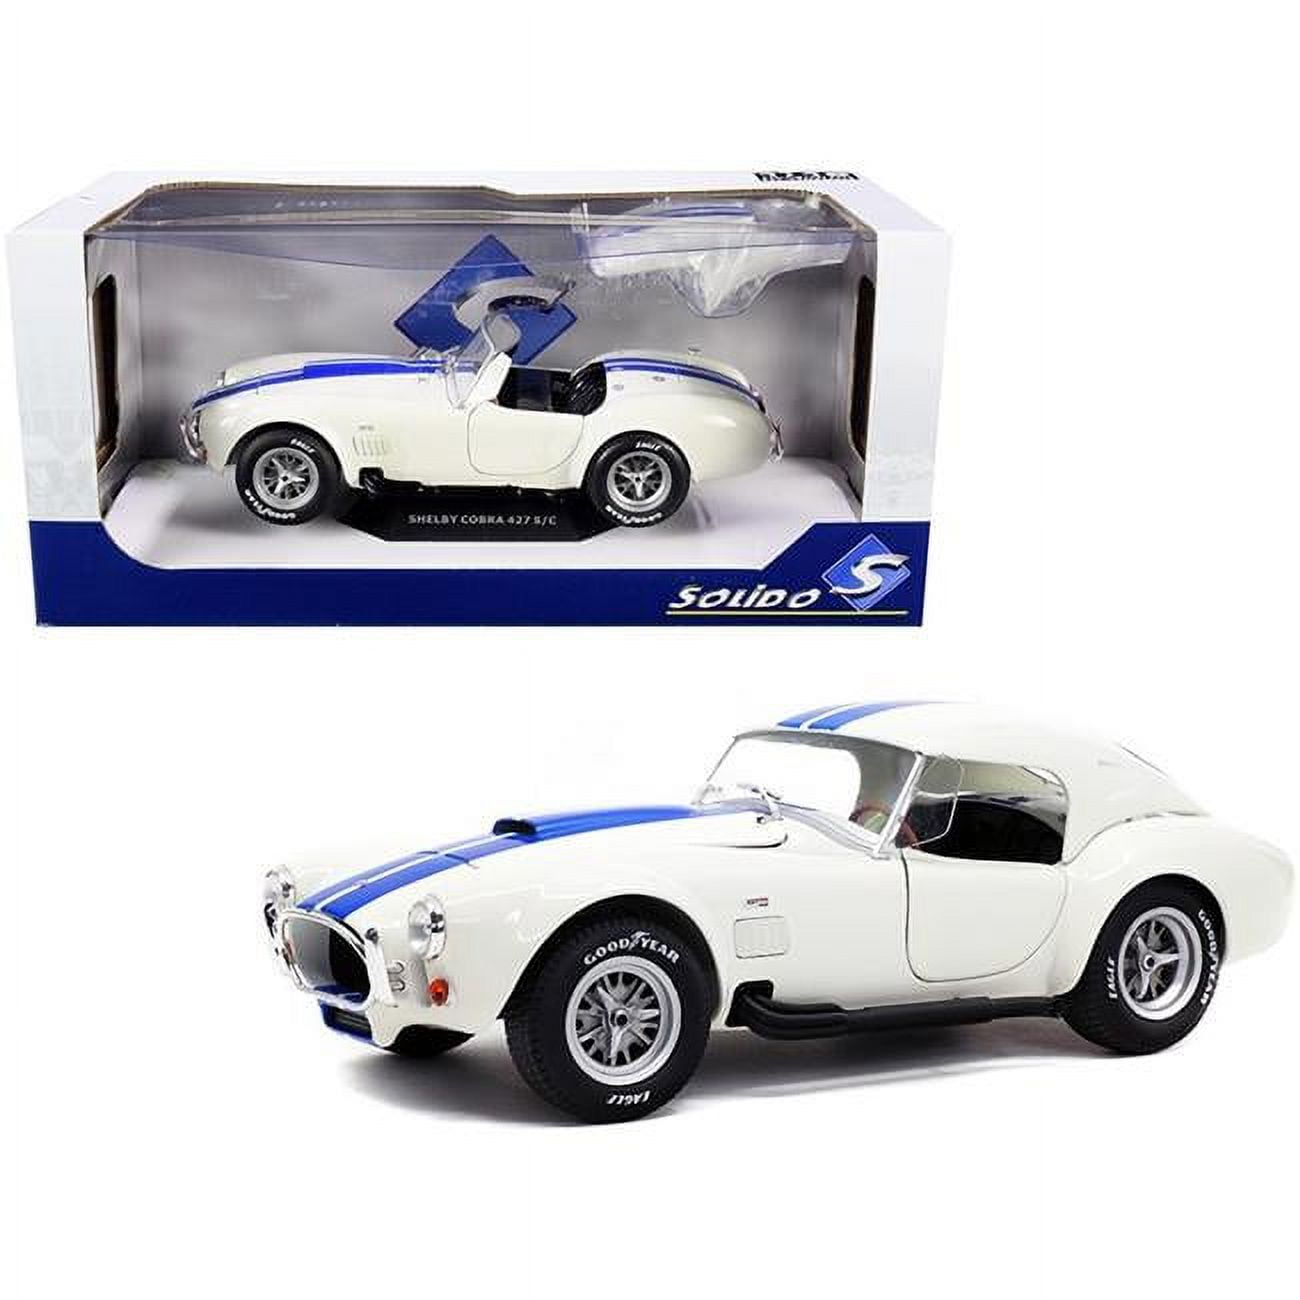 Picture of Solido S1804906 1-18 Diecast Model Car for Shelby Cobra 427 S-C Convertible Wimbledon White with Blue Stripes